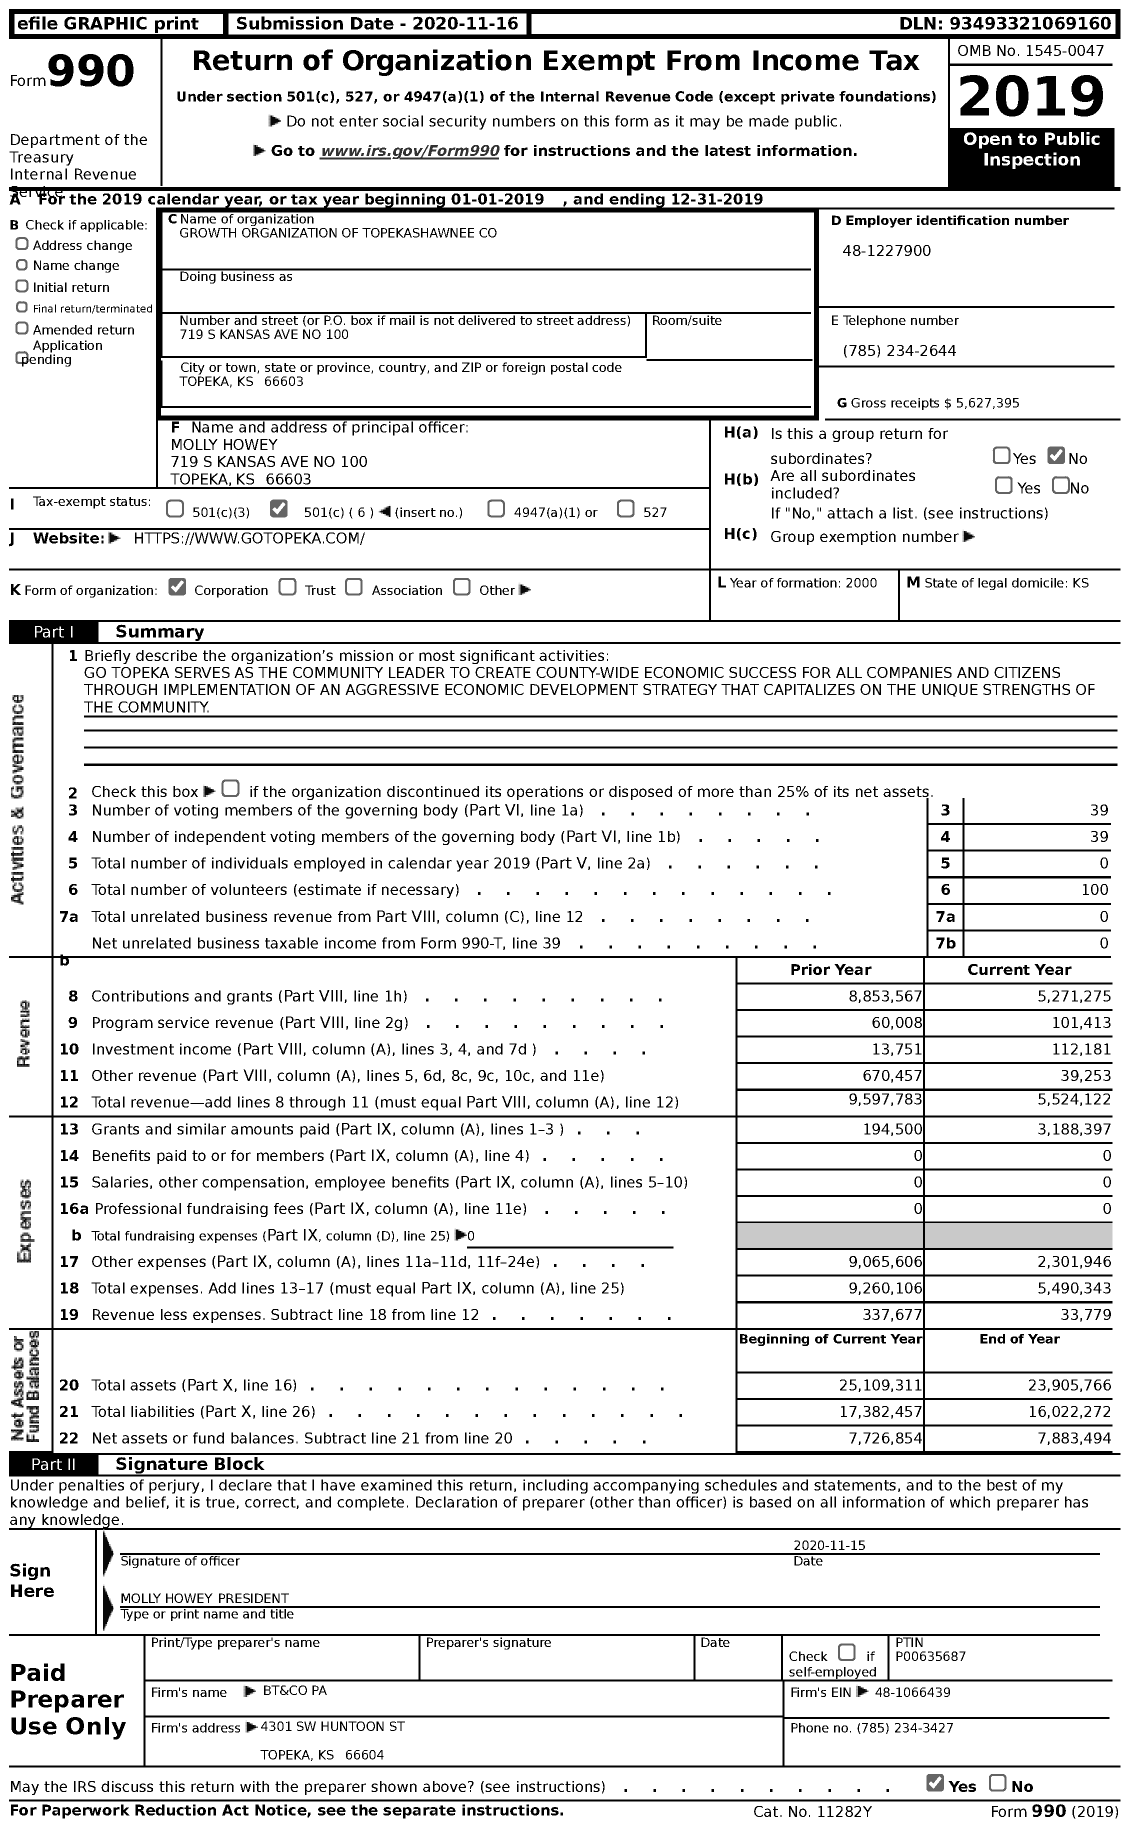 Image of first page of 2019 Form 990 for Growth Organization of Topekashawnee